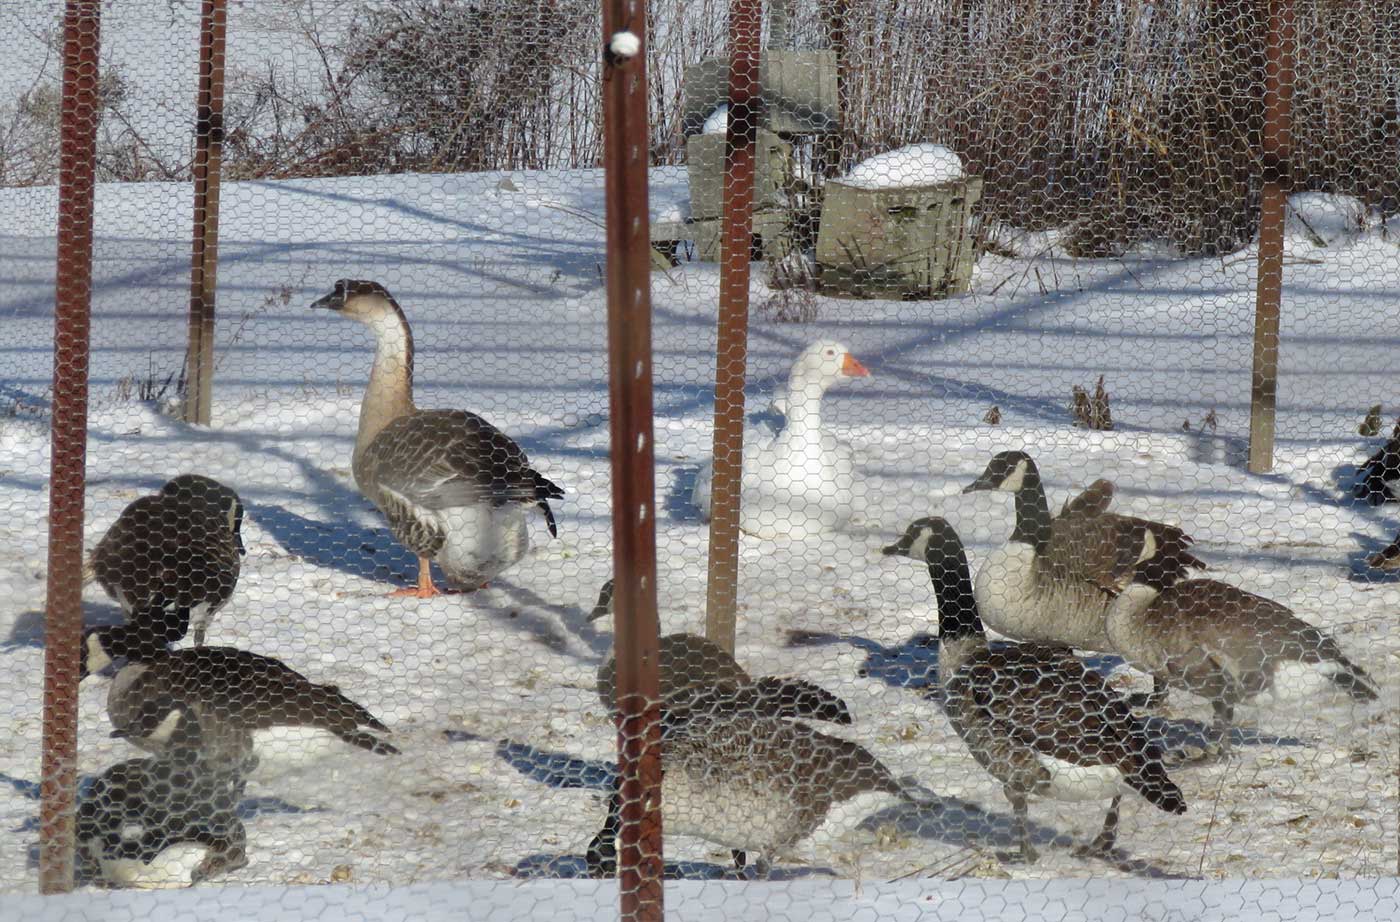 Geese on snowy ground